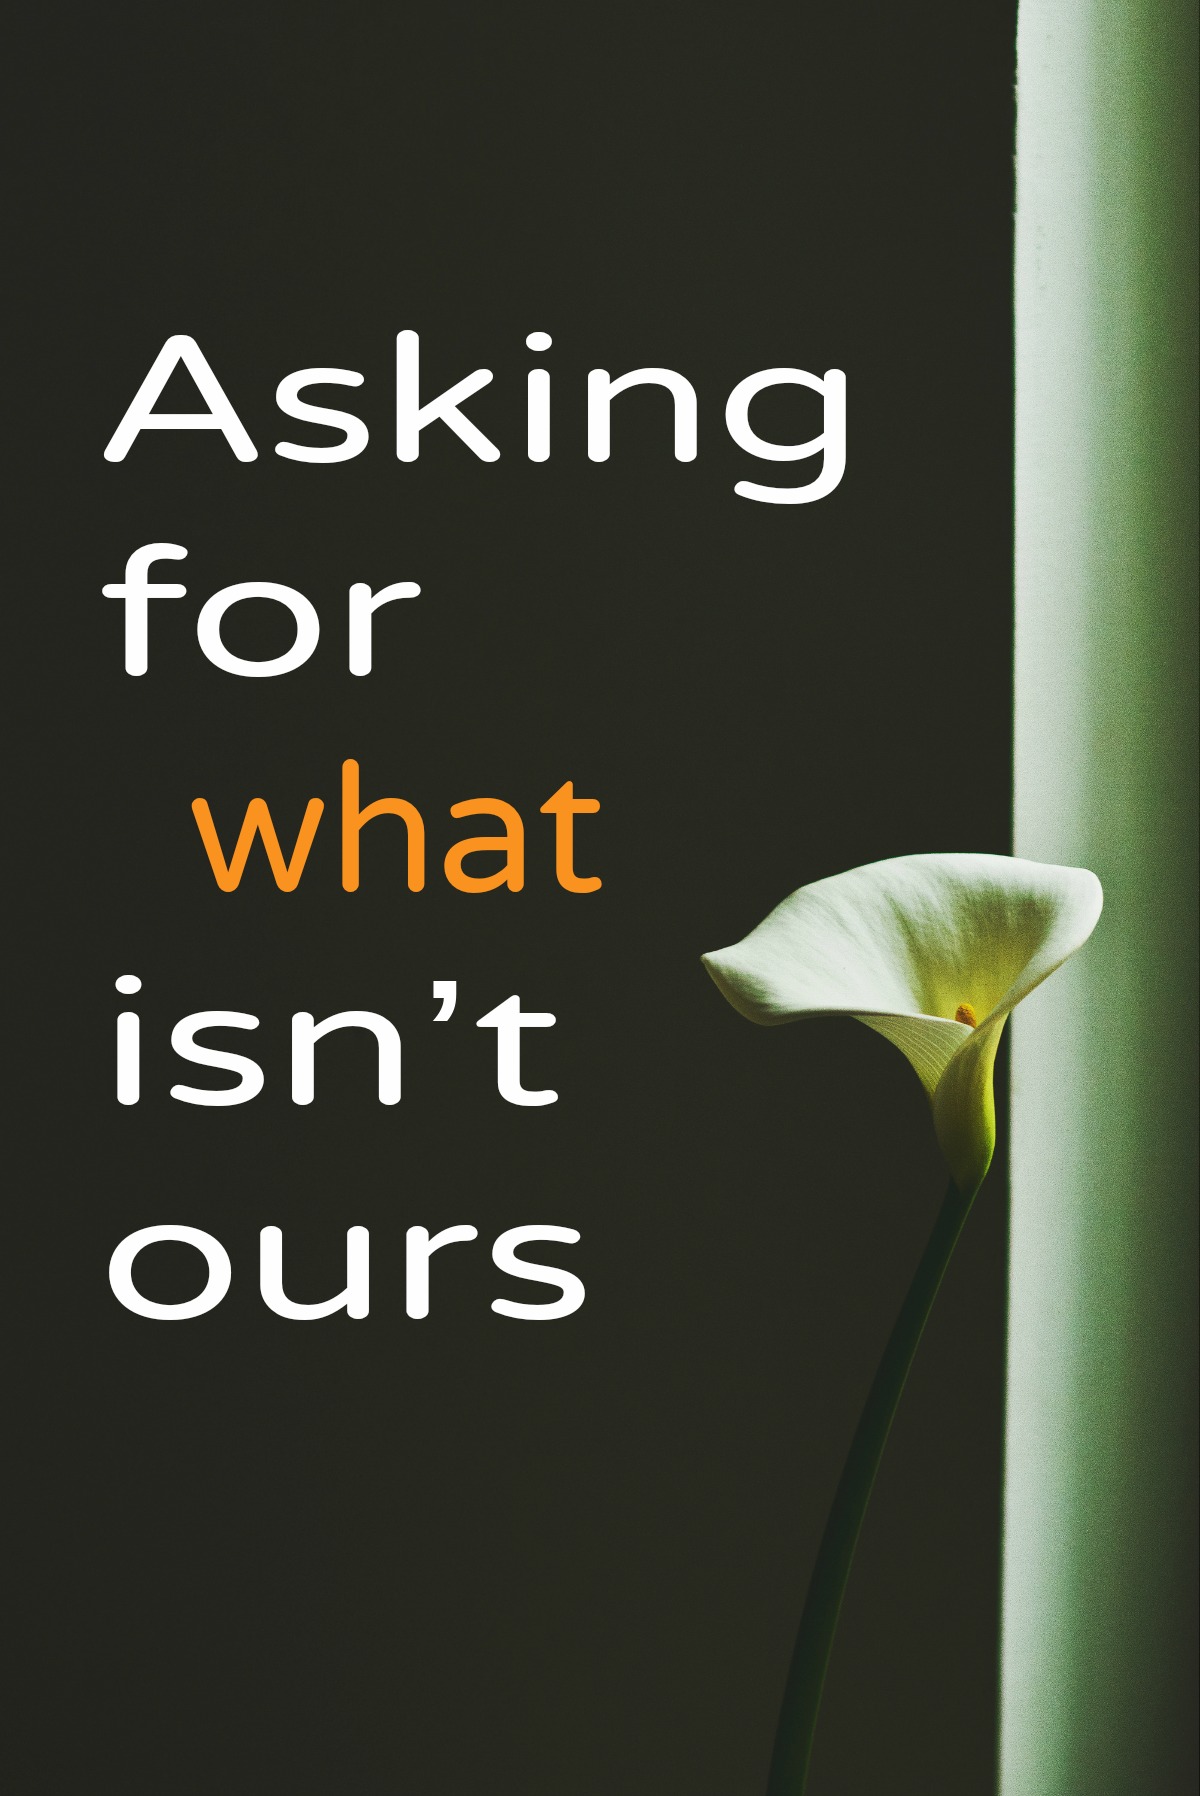 "Asking for what isn't ours" a homily for Proper 6B by Drew Downs